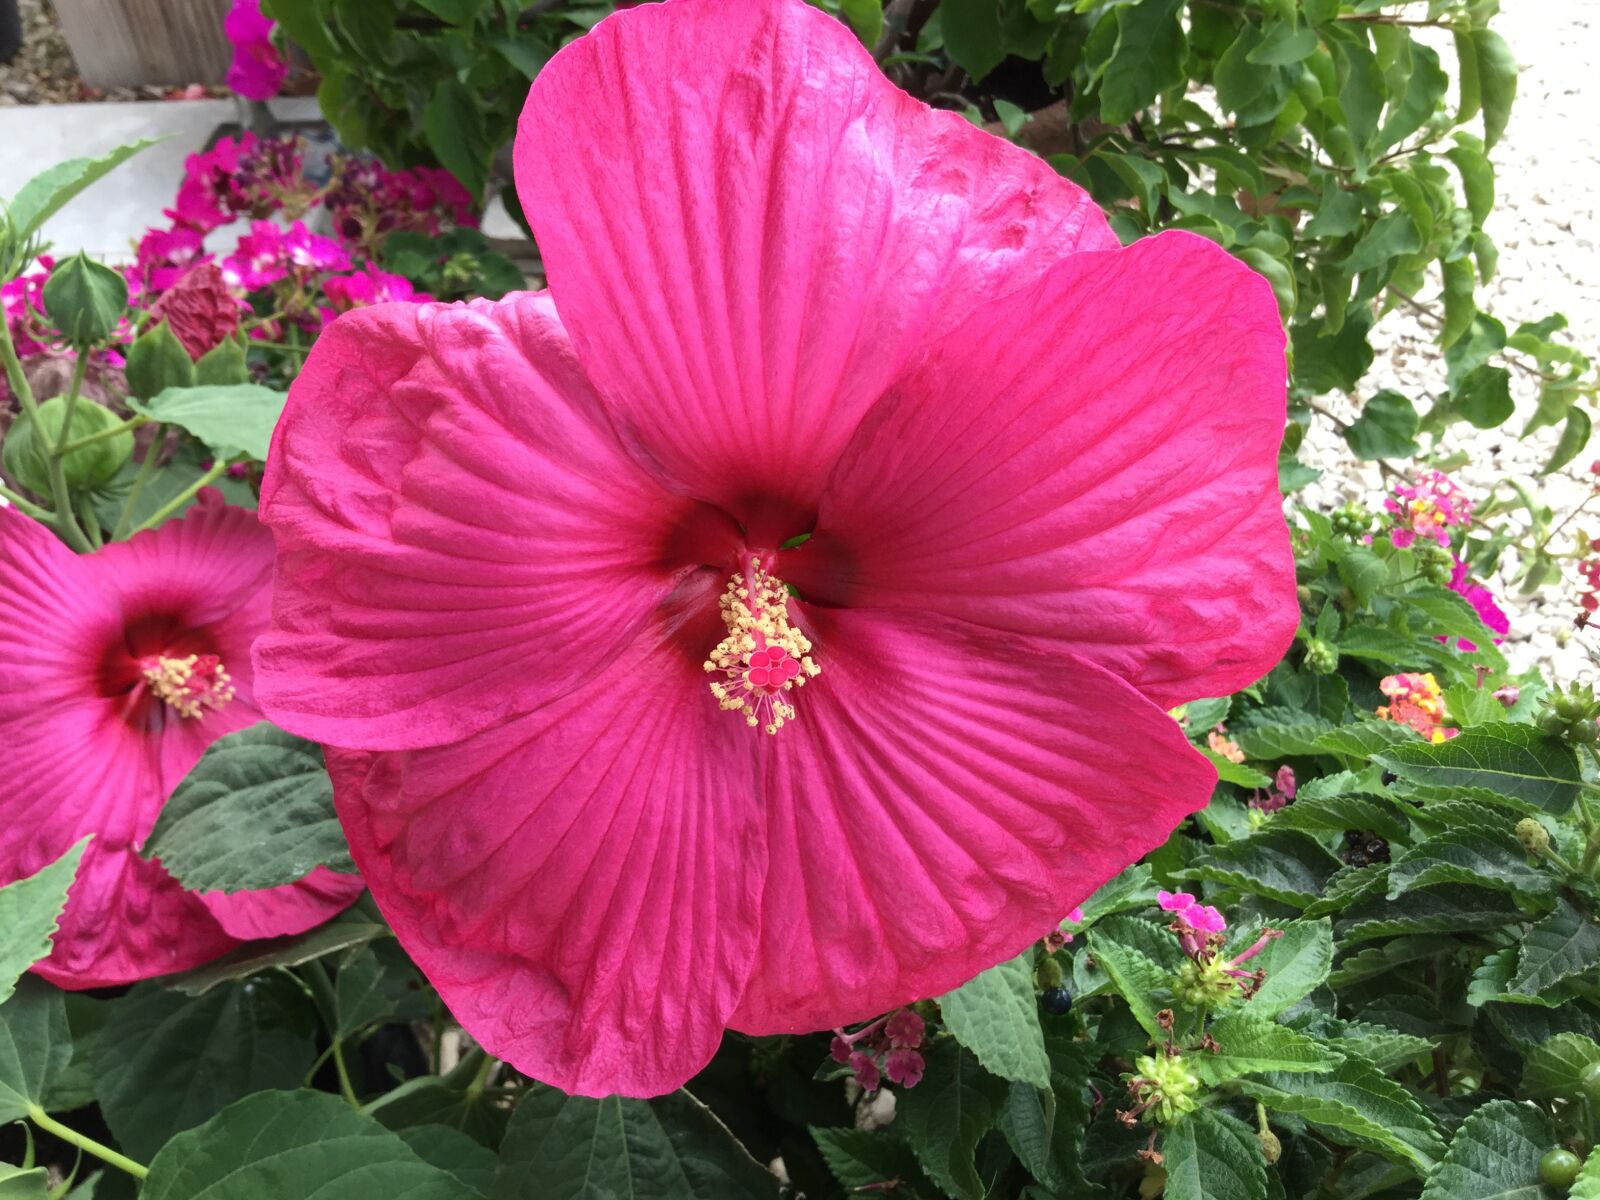 iPad Air 2 back camera 3.3mm f/2.4 sample photo. Hibiscus, flower, floral photography